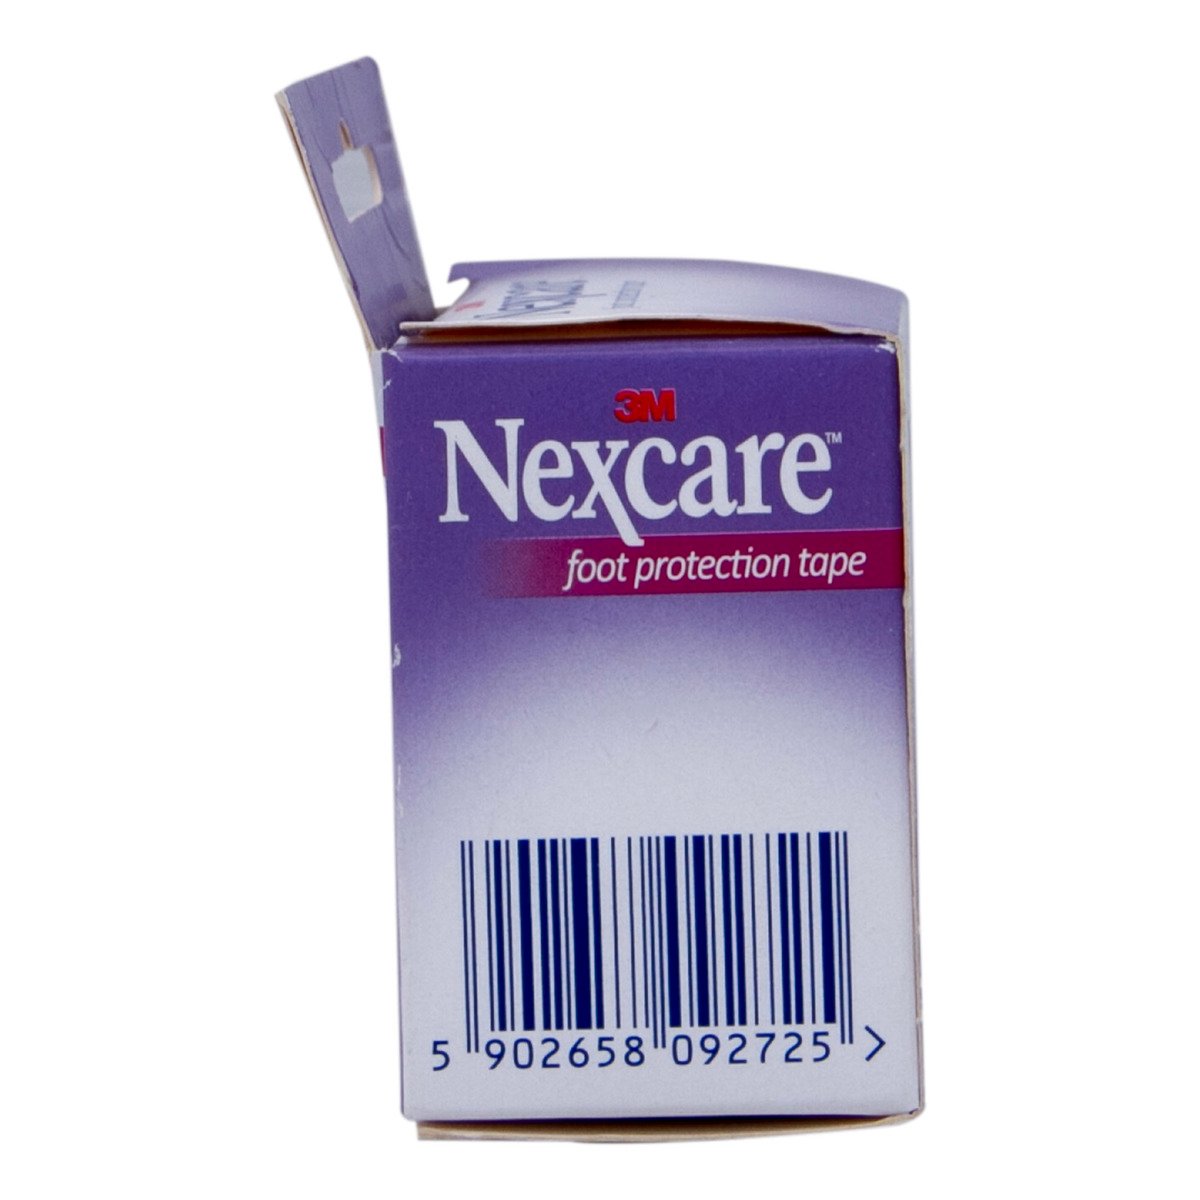 3M Nexcare Foot Protection Tape 1 pkt